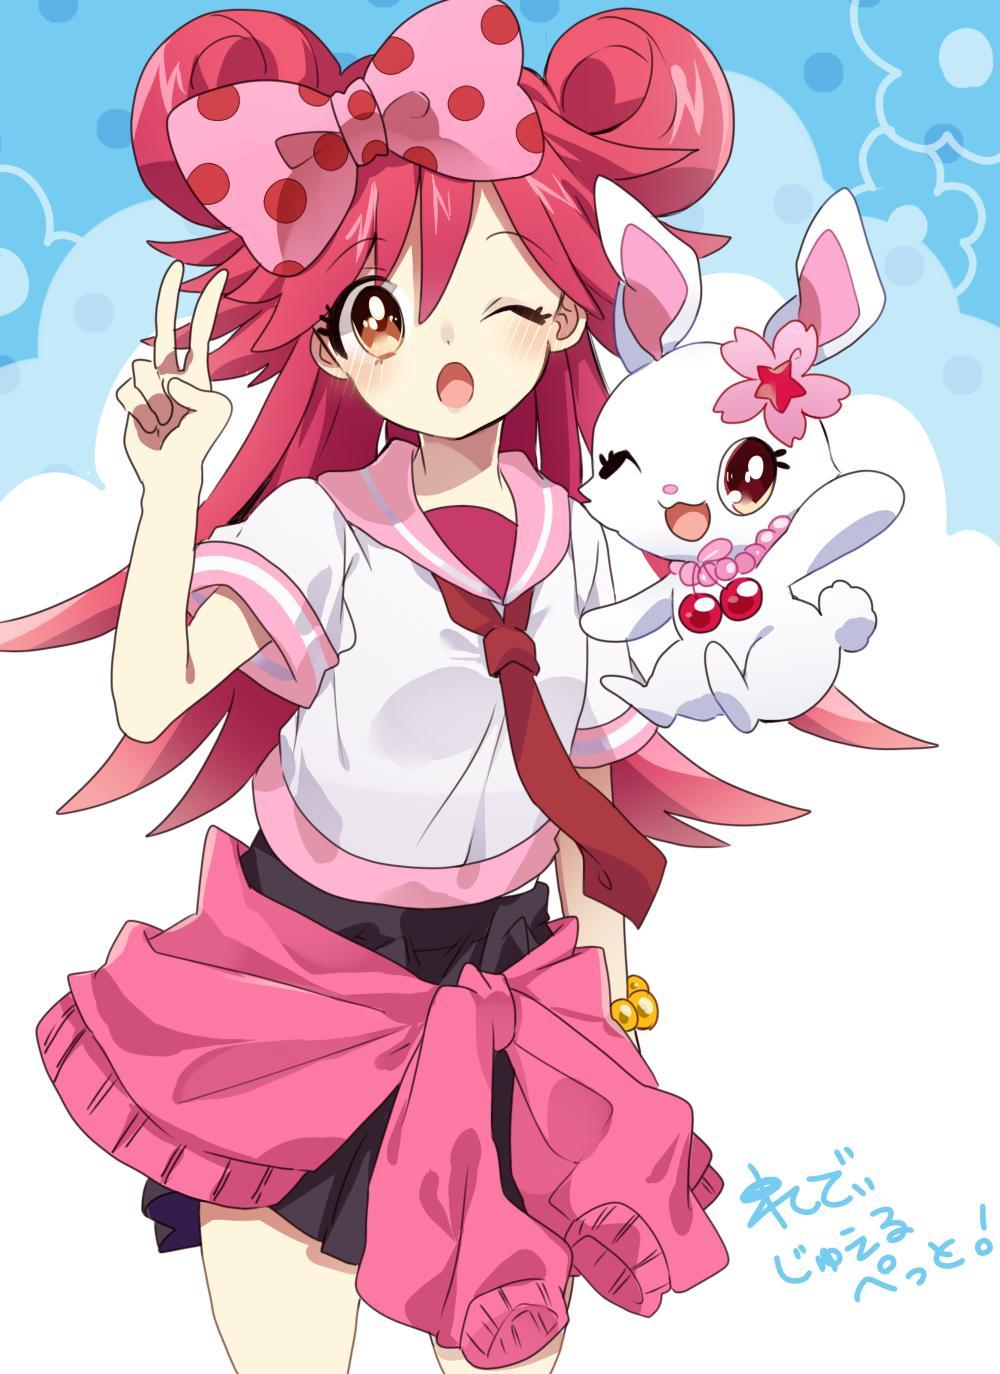 Jewelpet Lady wallpaper for Android